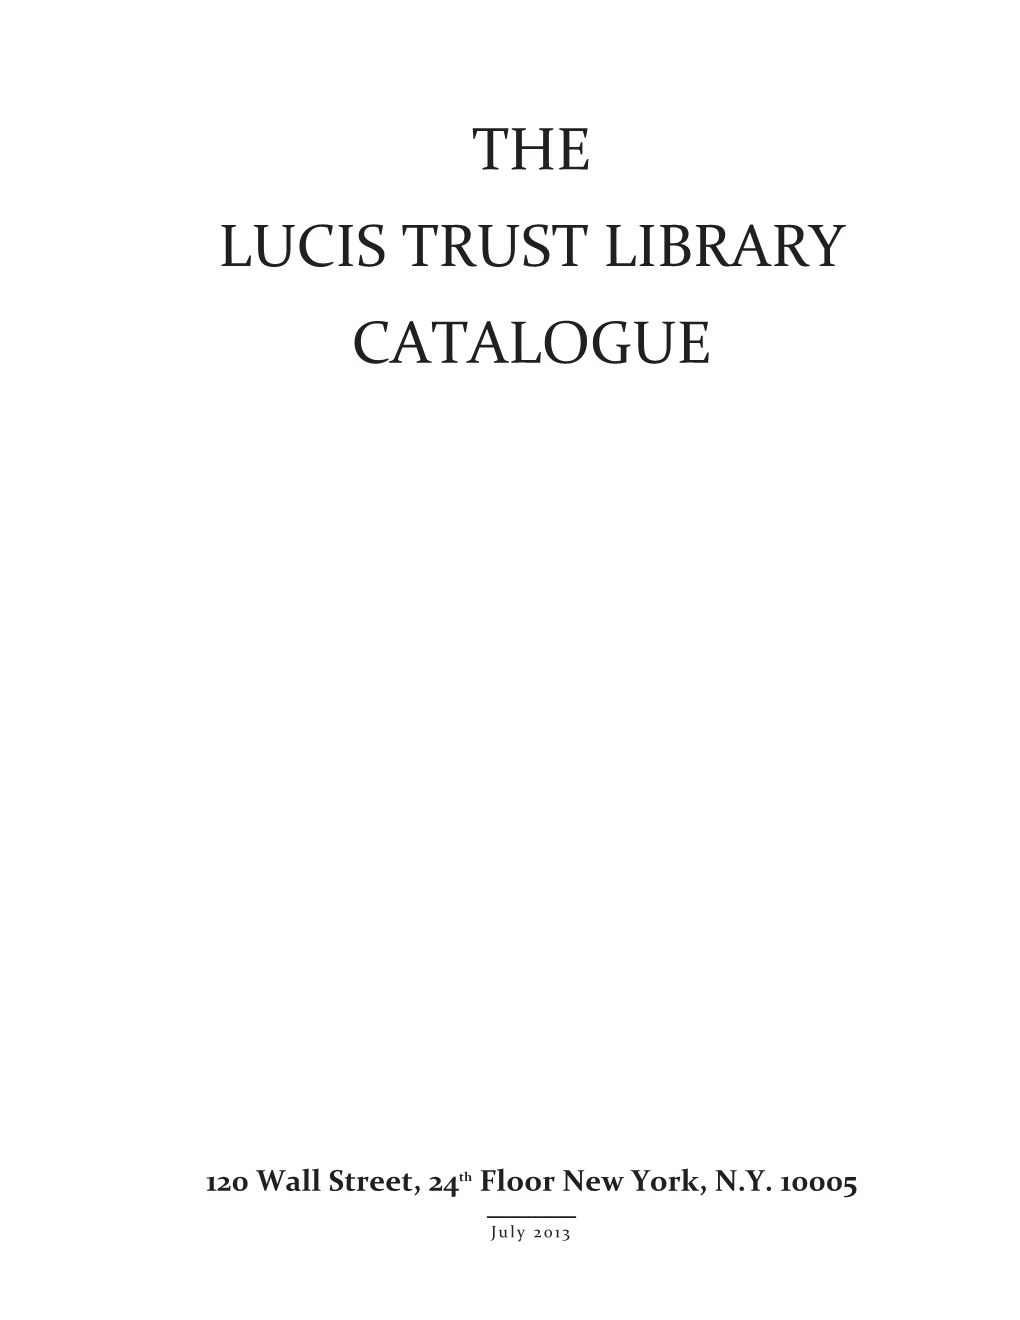 The Lucis Trust Library Catalogue